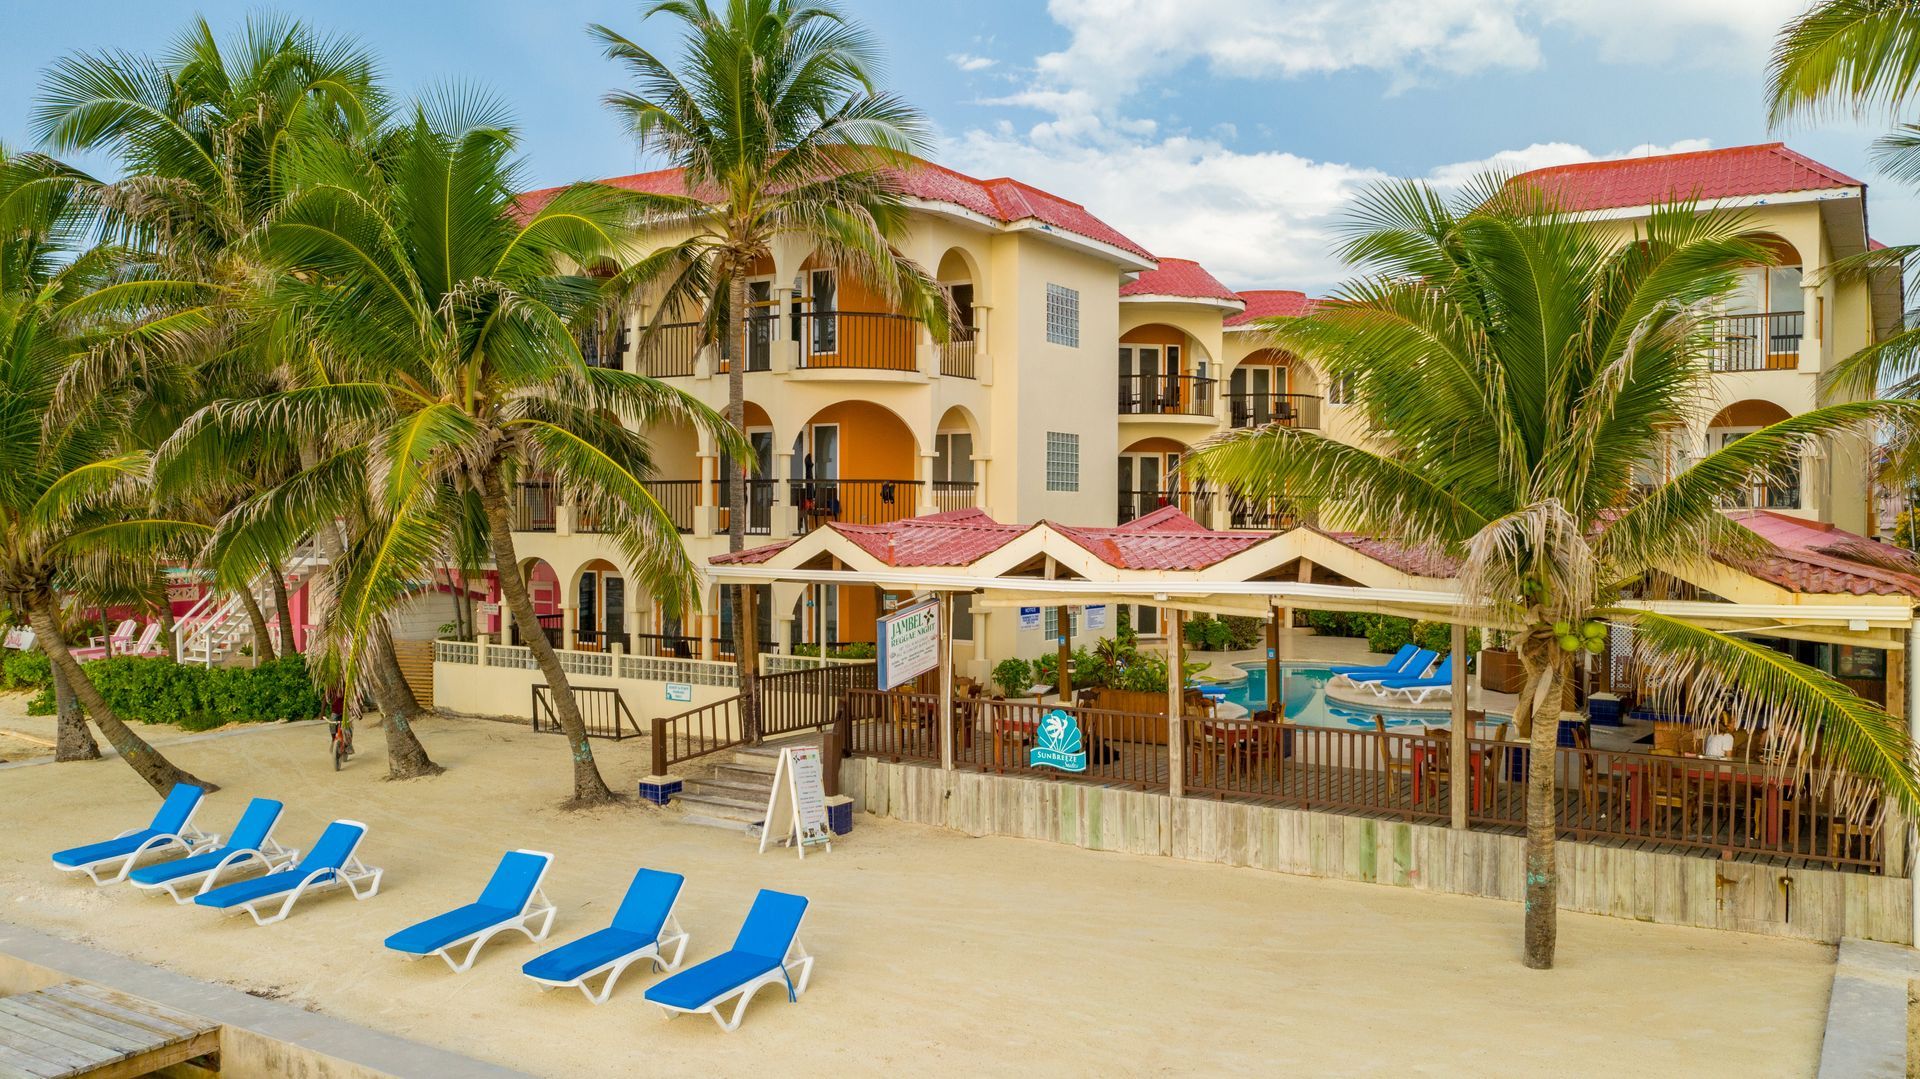 a large building with a red roof is sitting on top of a sandy beach surrounded by palm trees .